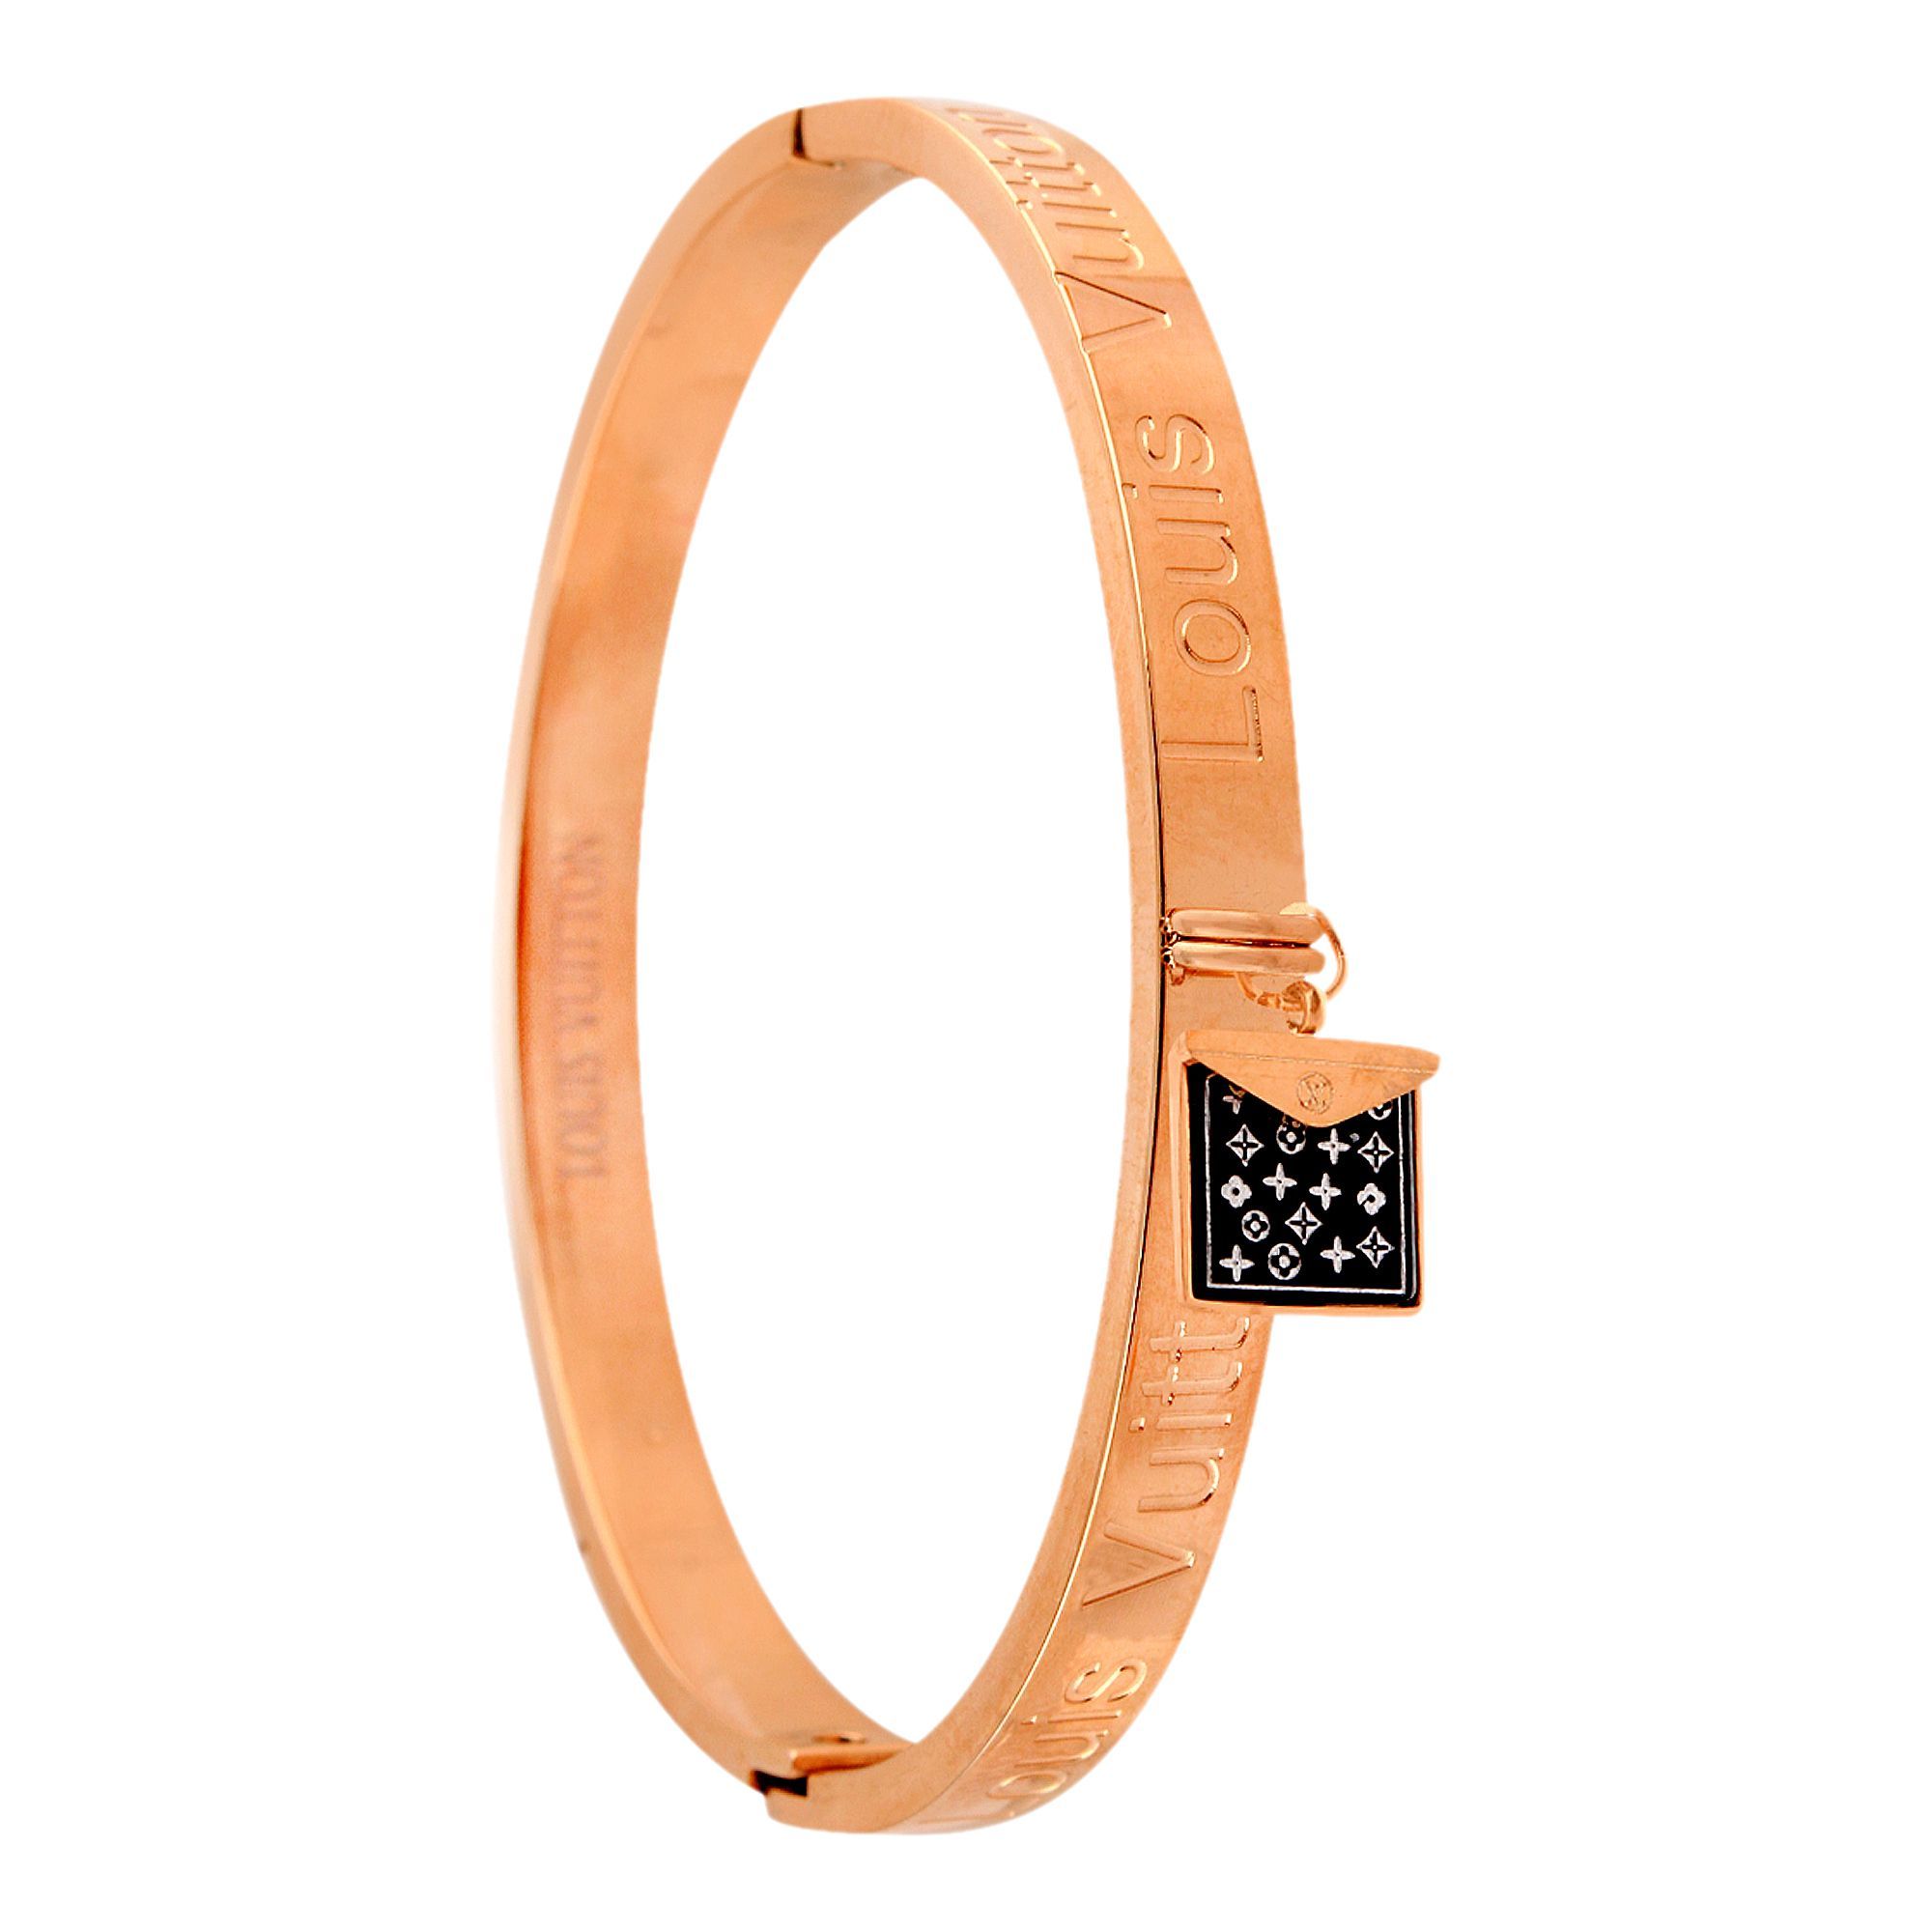 Purchase LV Style Girls Bracelet, Rose Gold, NS-0177 Online at Best Price in Pakistan - www.cinemas93.org